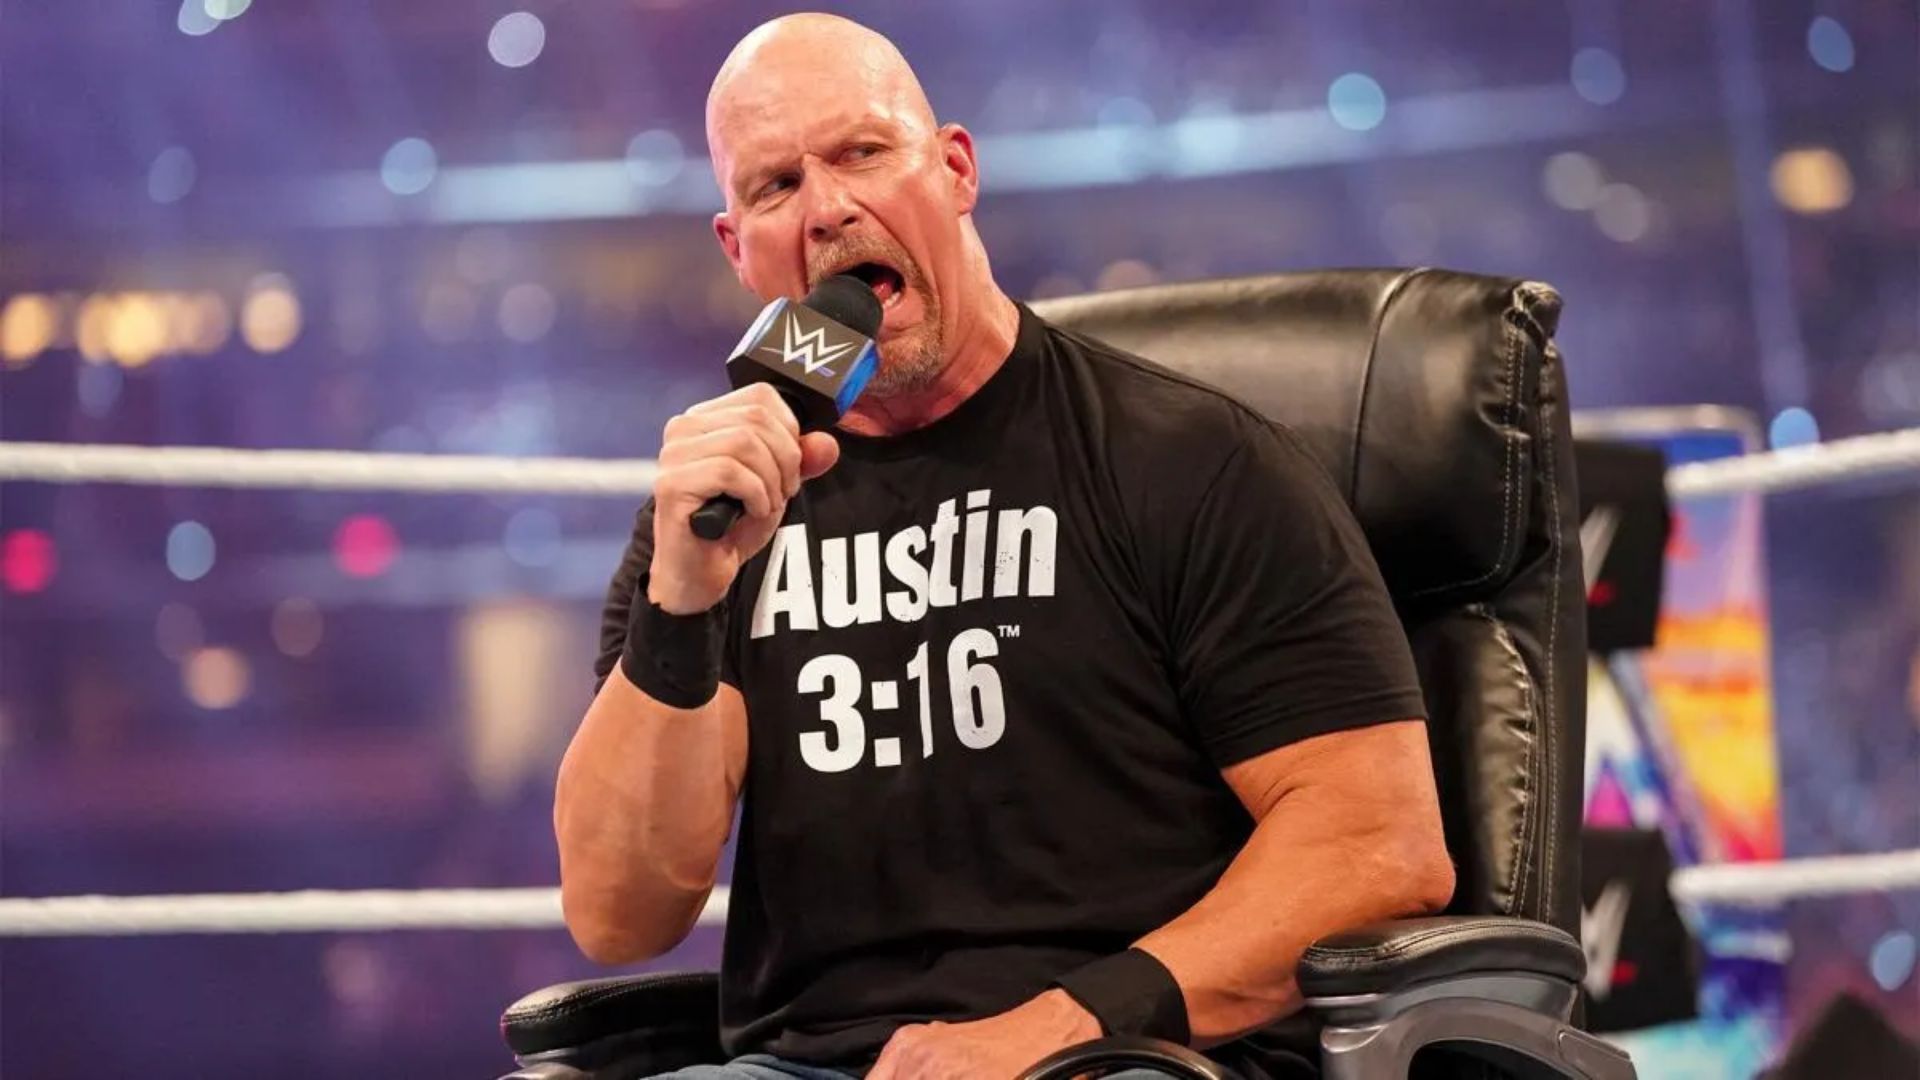 Stone Cold Steve Austin is a legend of the pro-wrestling business